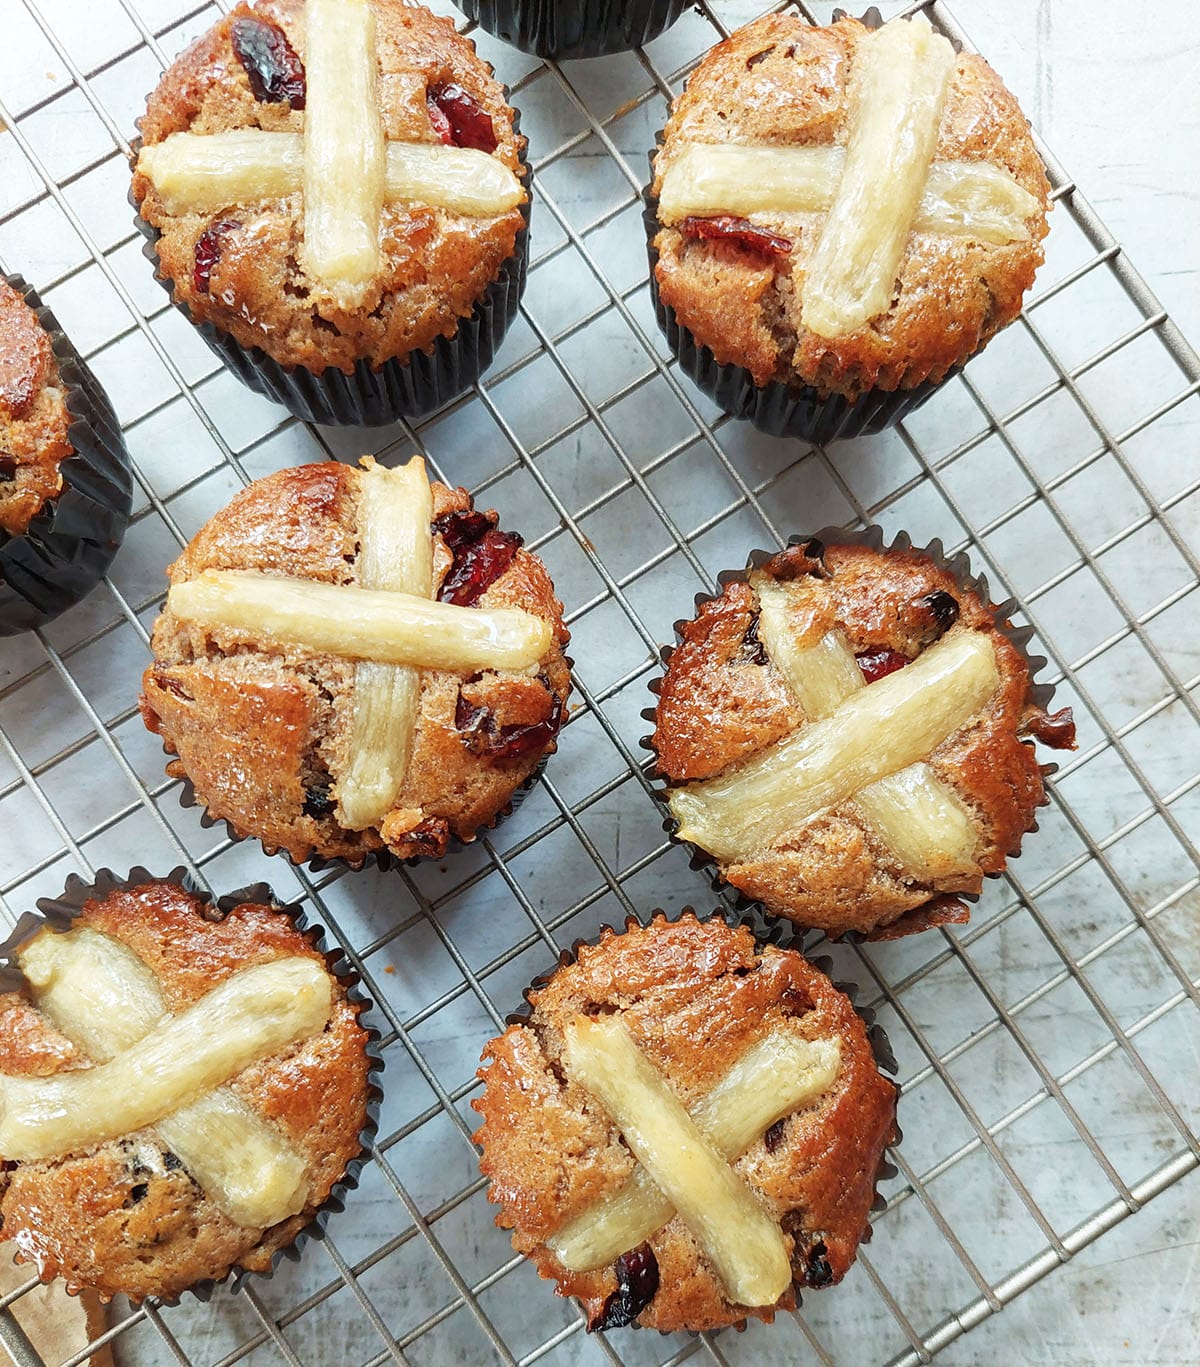 With its sweet spiced flavor and super soft cake like texture, they are a delicious variation on traditional Hot Cross buns. 